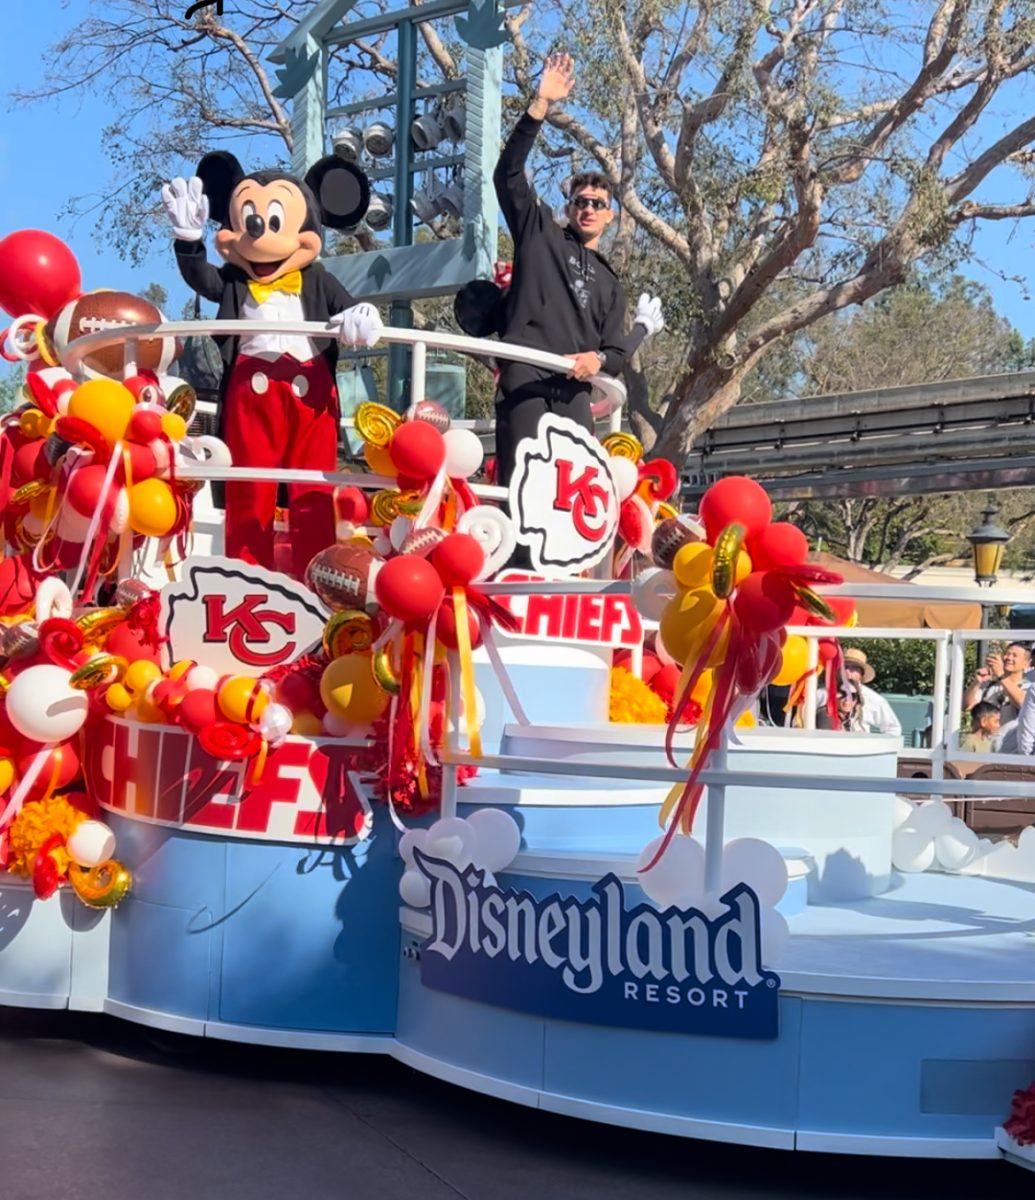 For the second time in a row, Patrick Mahomes celebrated his team’s Super Bowl win at Disneyland.